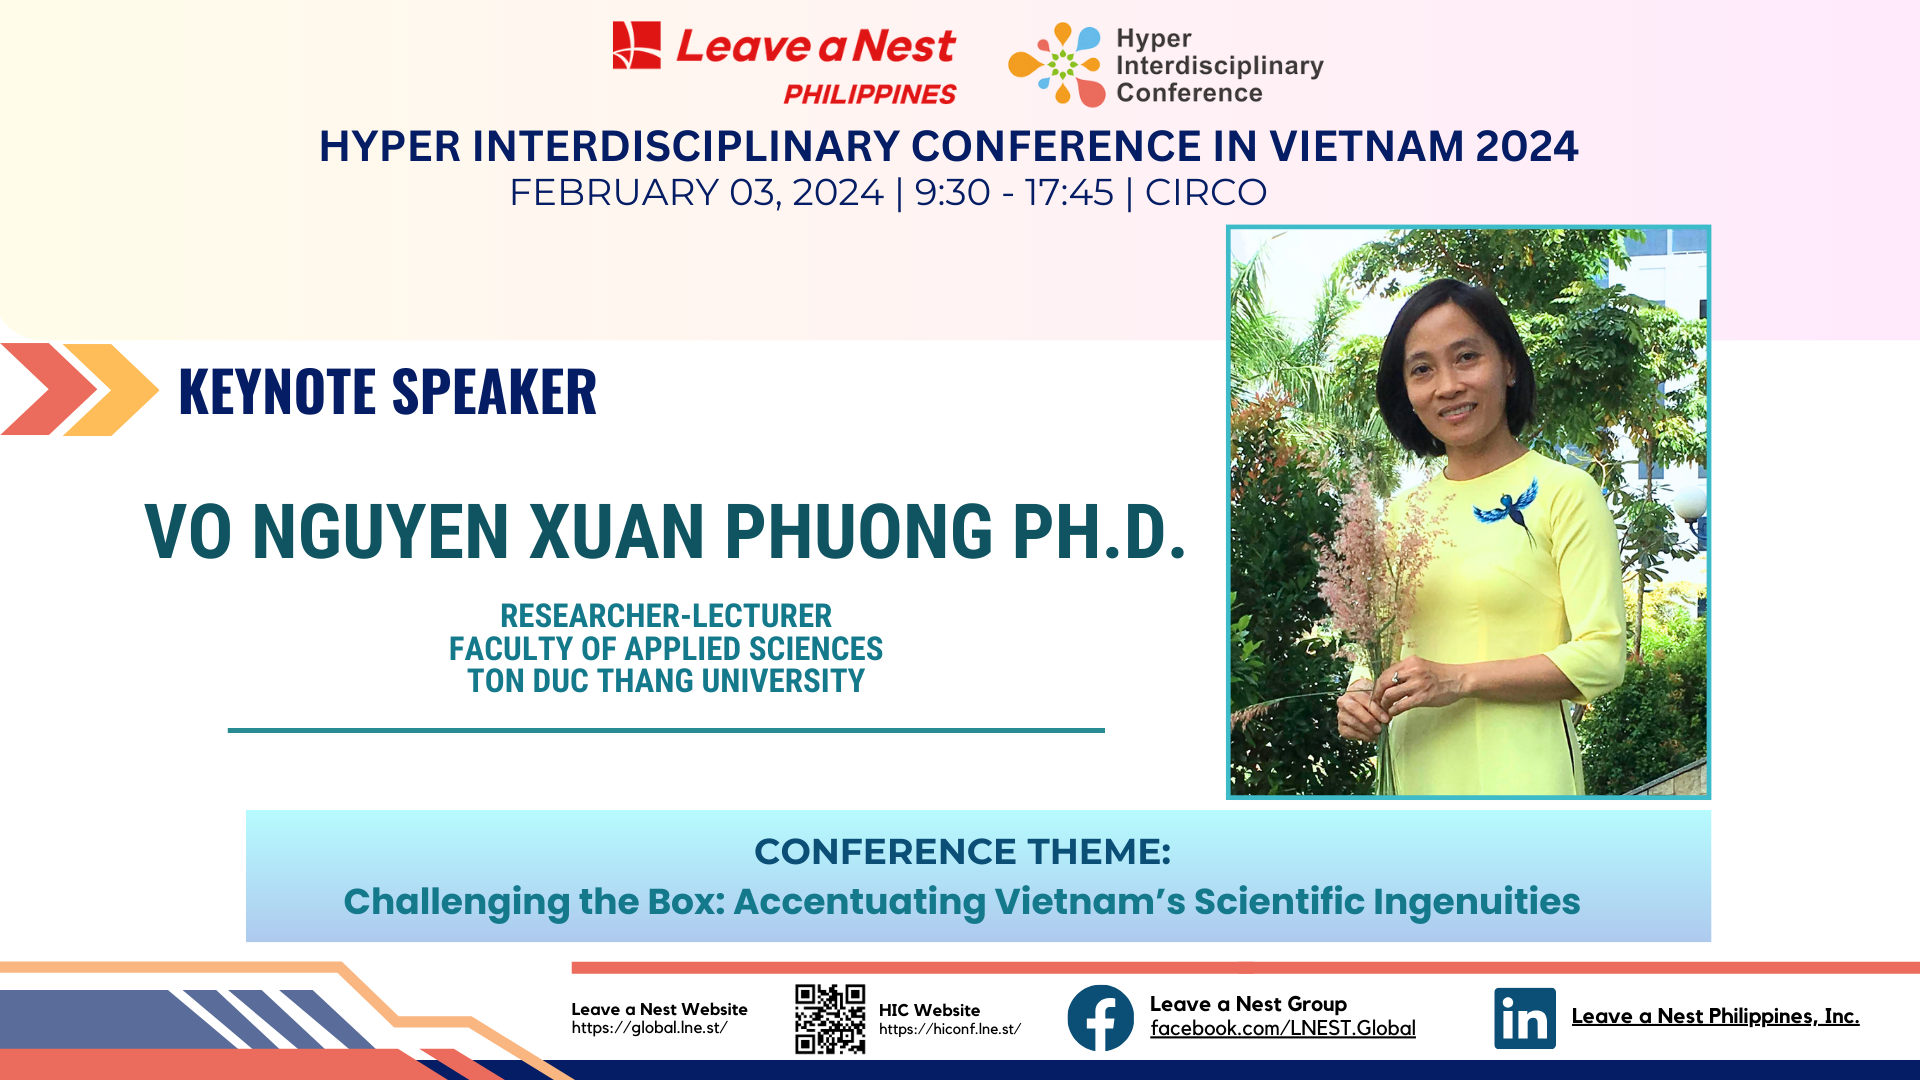 Challenging the Box: Accentuating Vietnam’s Scientific Ingenuities: Keynote Session Speaker  for Hyper Interdisciplinary Conference in Vietnam 2024